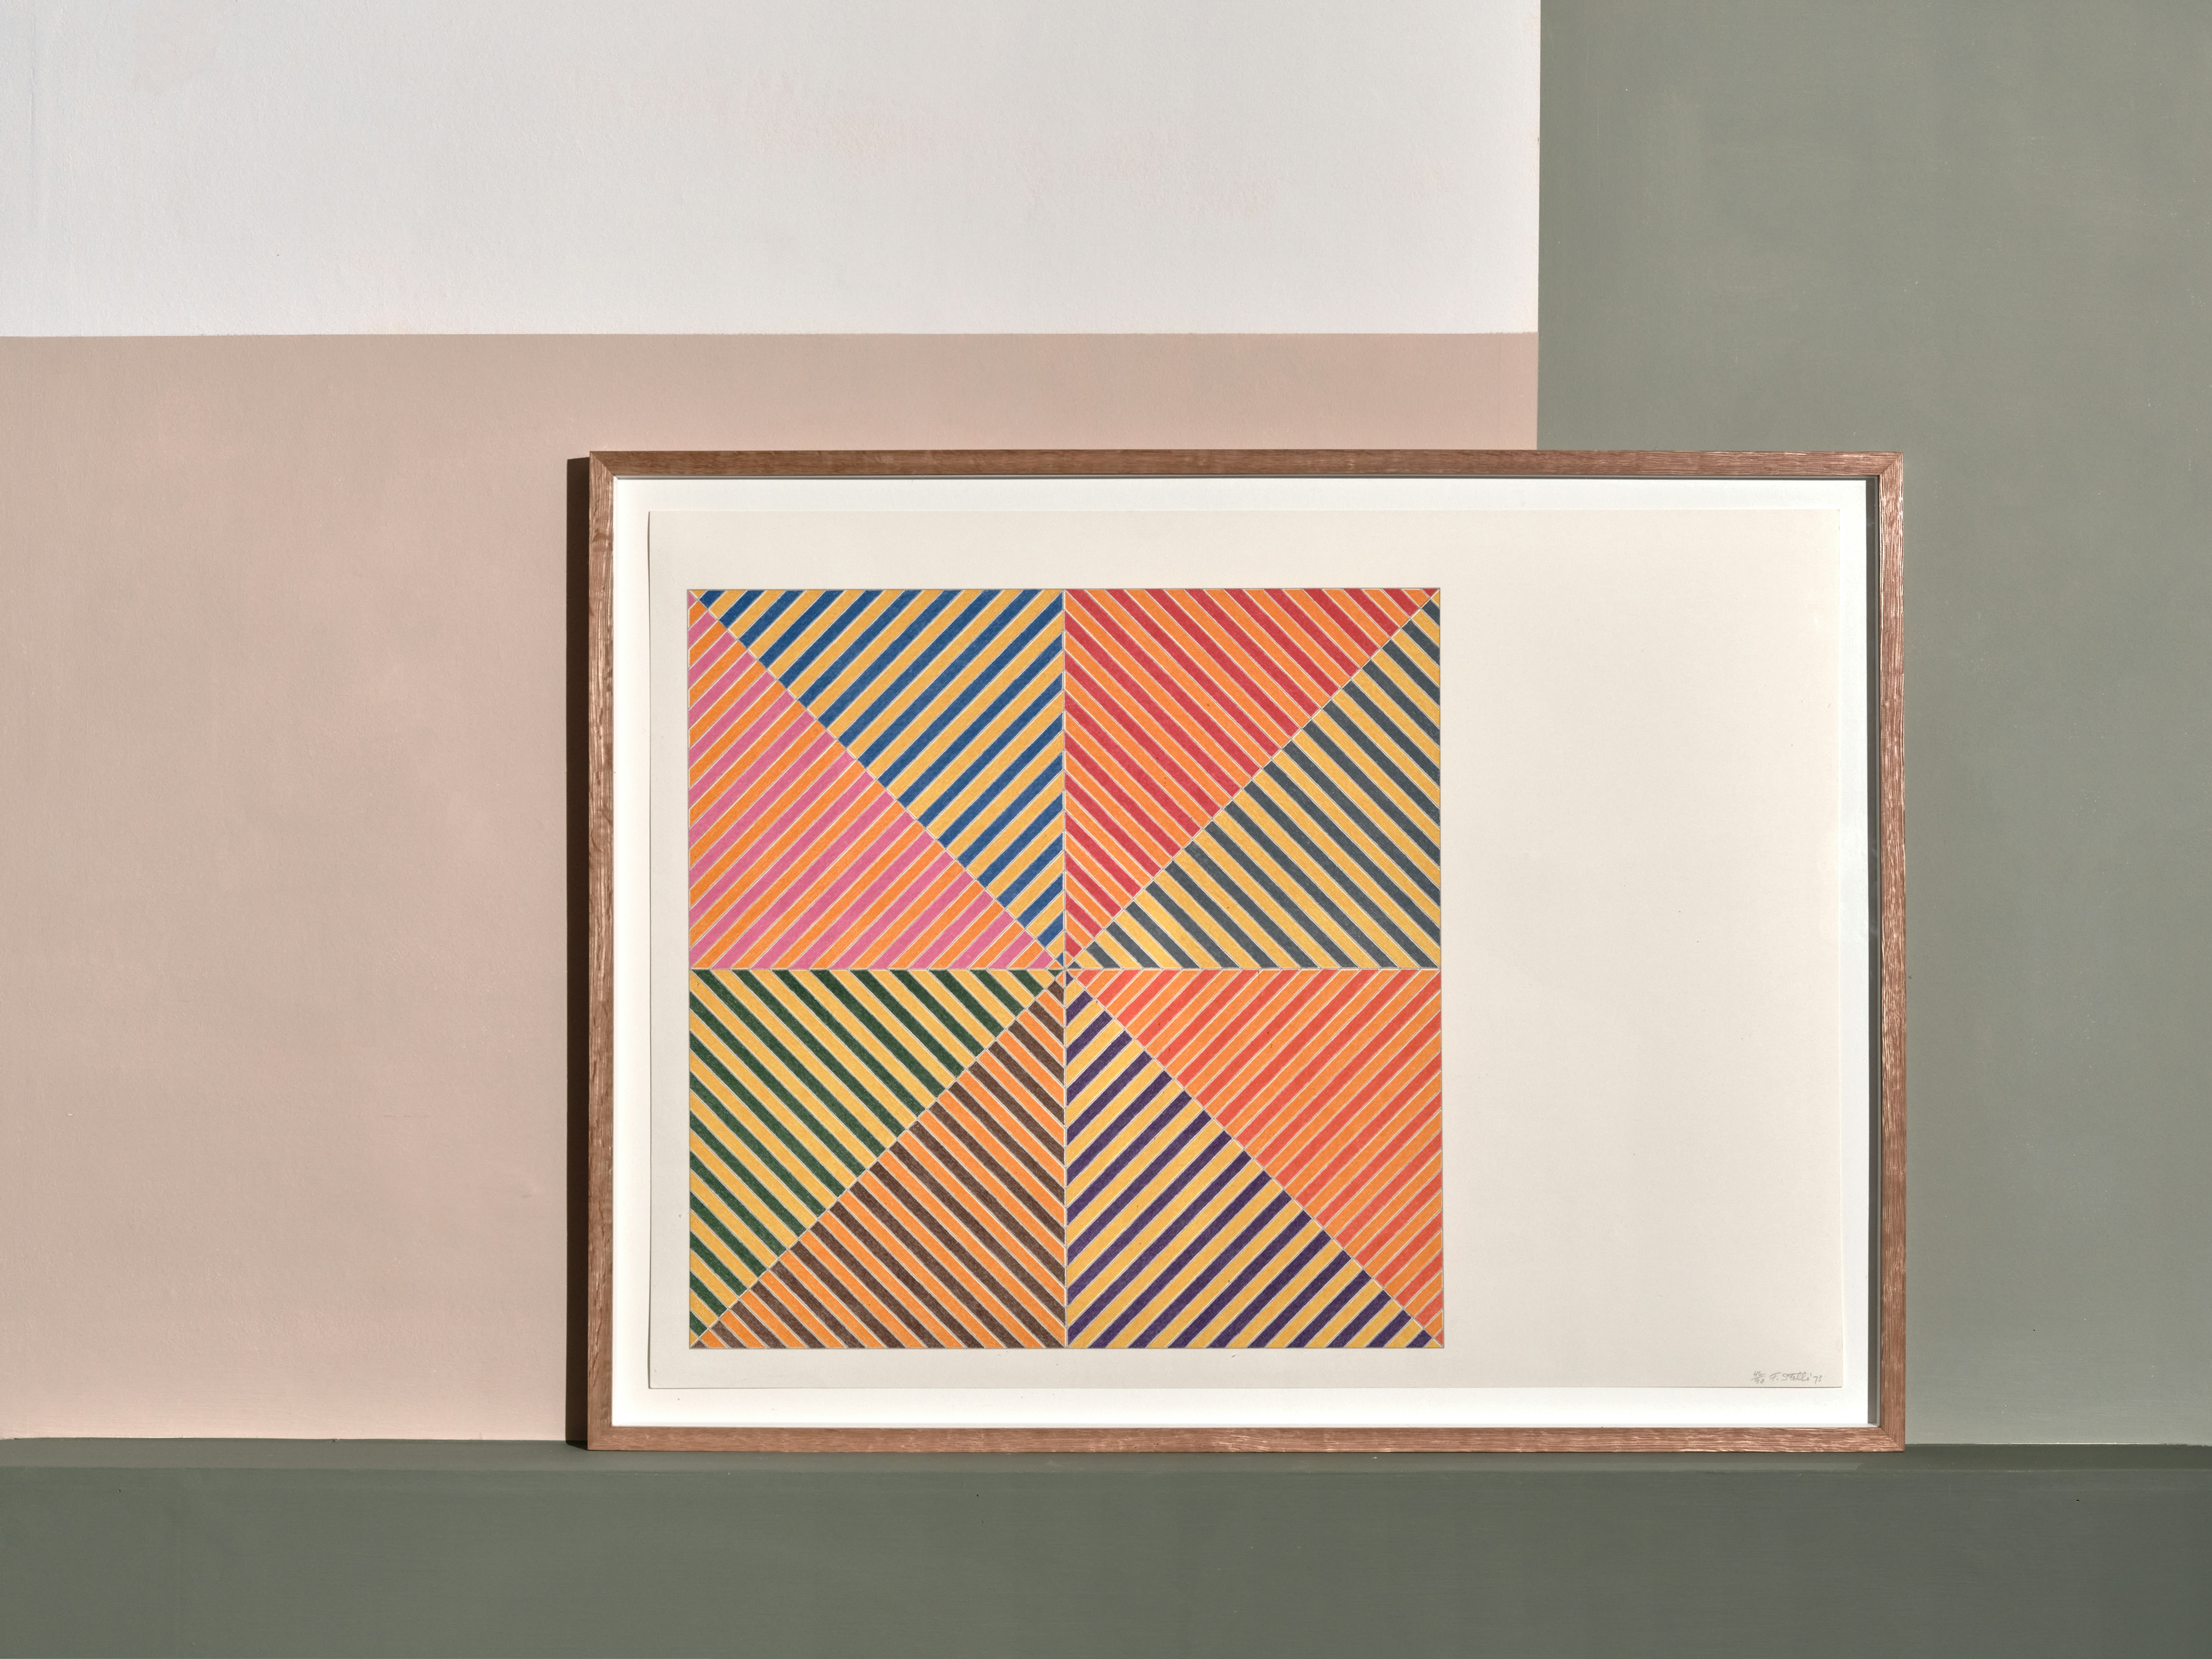 installation photograph of framed offset lithograph in colours by Frank Stella depicting colourful lines forming square